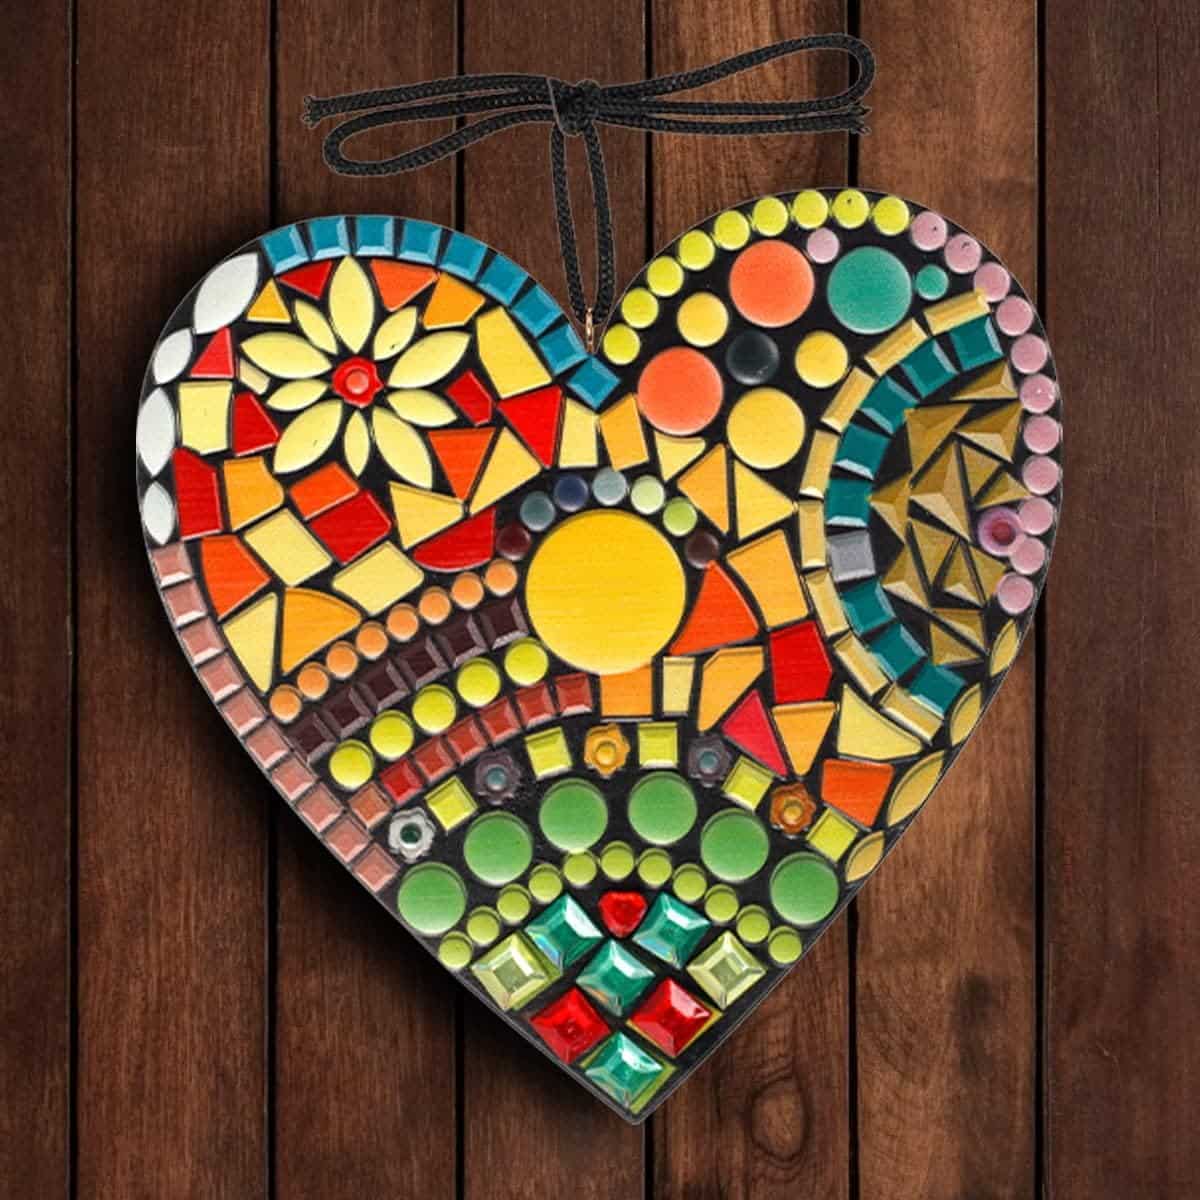 NA Mosaic Heart Sculpture Decor Ornaments, Resin Colorful Love Decorations 36225